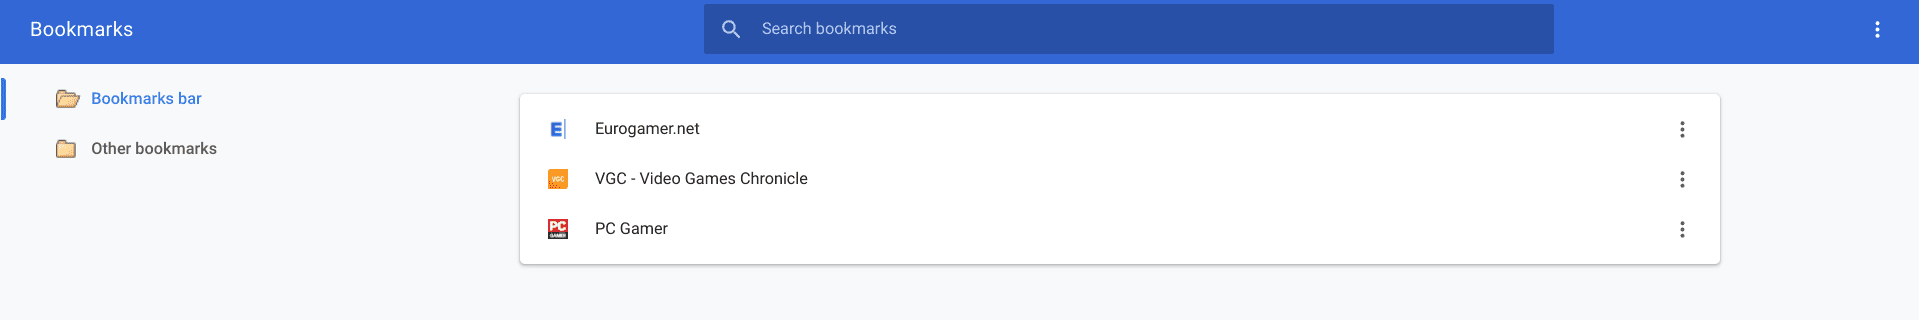 Bookmarks successfully imported